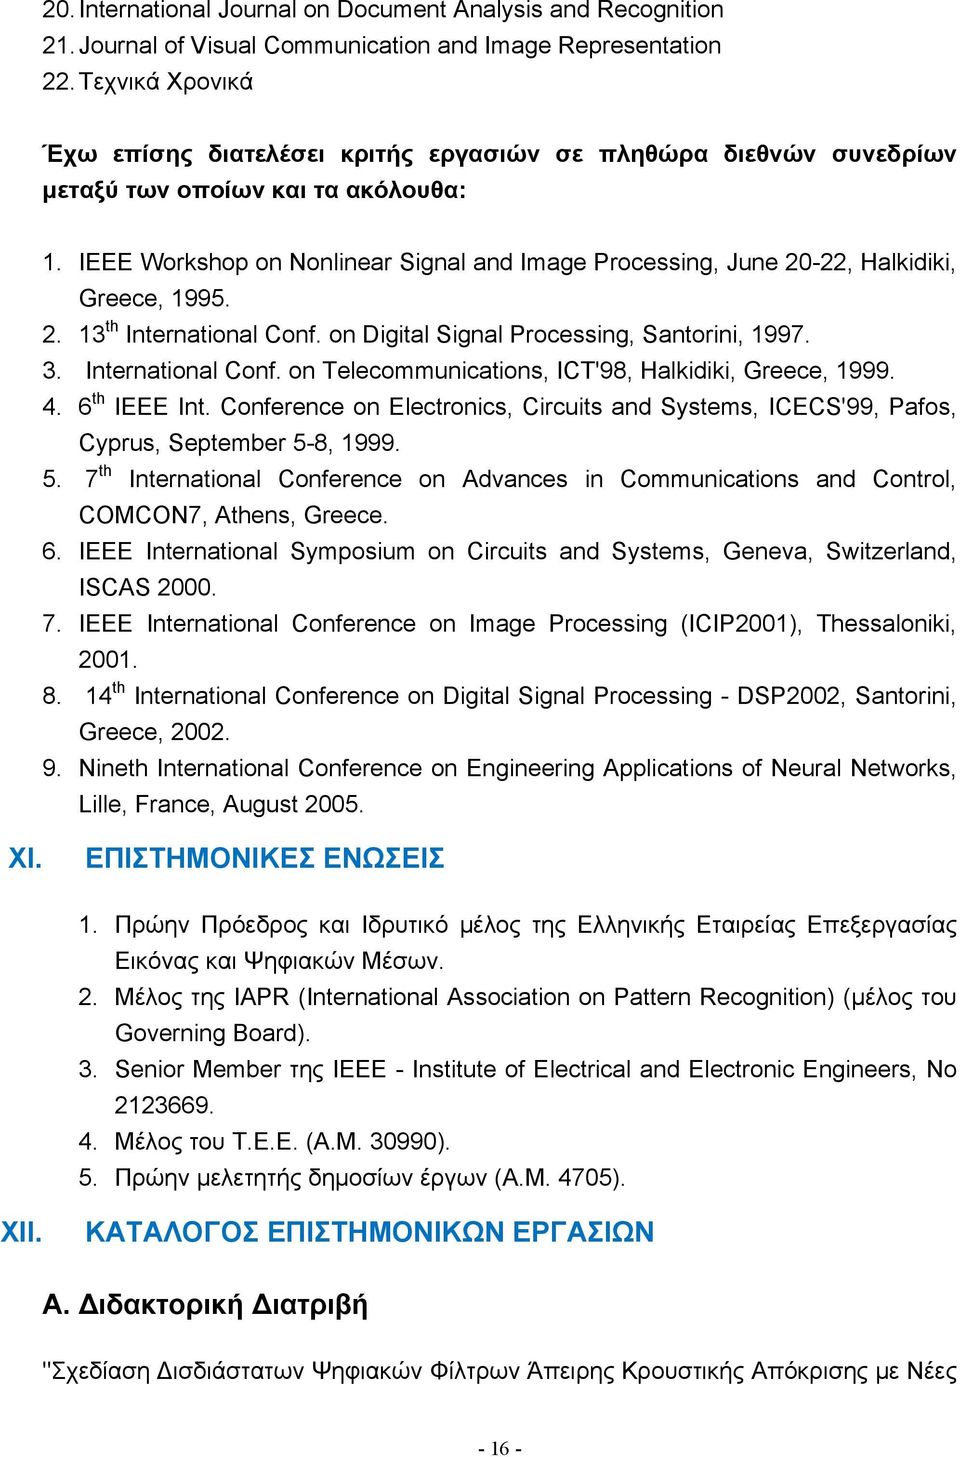 IEEE Workshop on Nonlinear Signal and Image Processing, June 20-22, Halkidiki, Greece, 1995. 2. 13 th International Conf. on Digital Signal Processing, Santorini, 1997. 3. International Conf. on Telecommunications, ICT'98, Halkidiki, Greece, 1999.